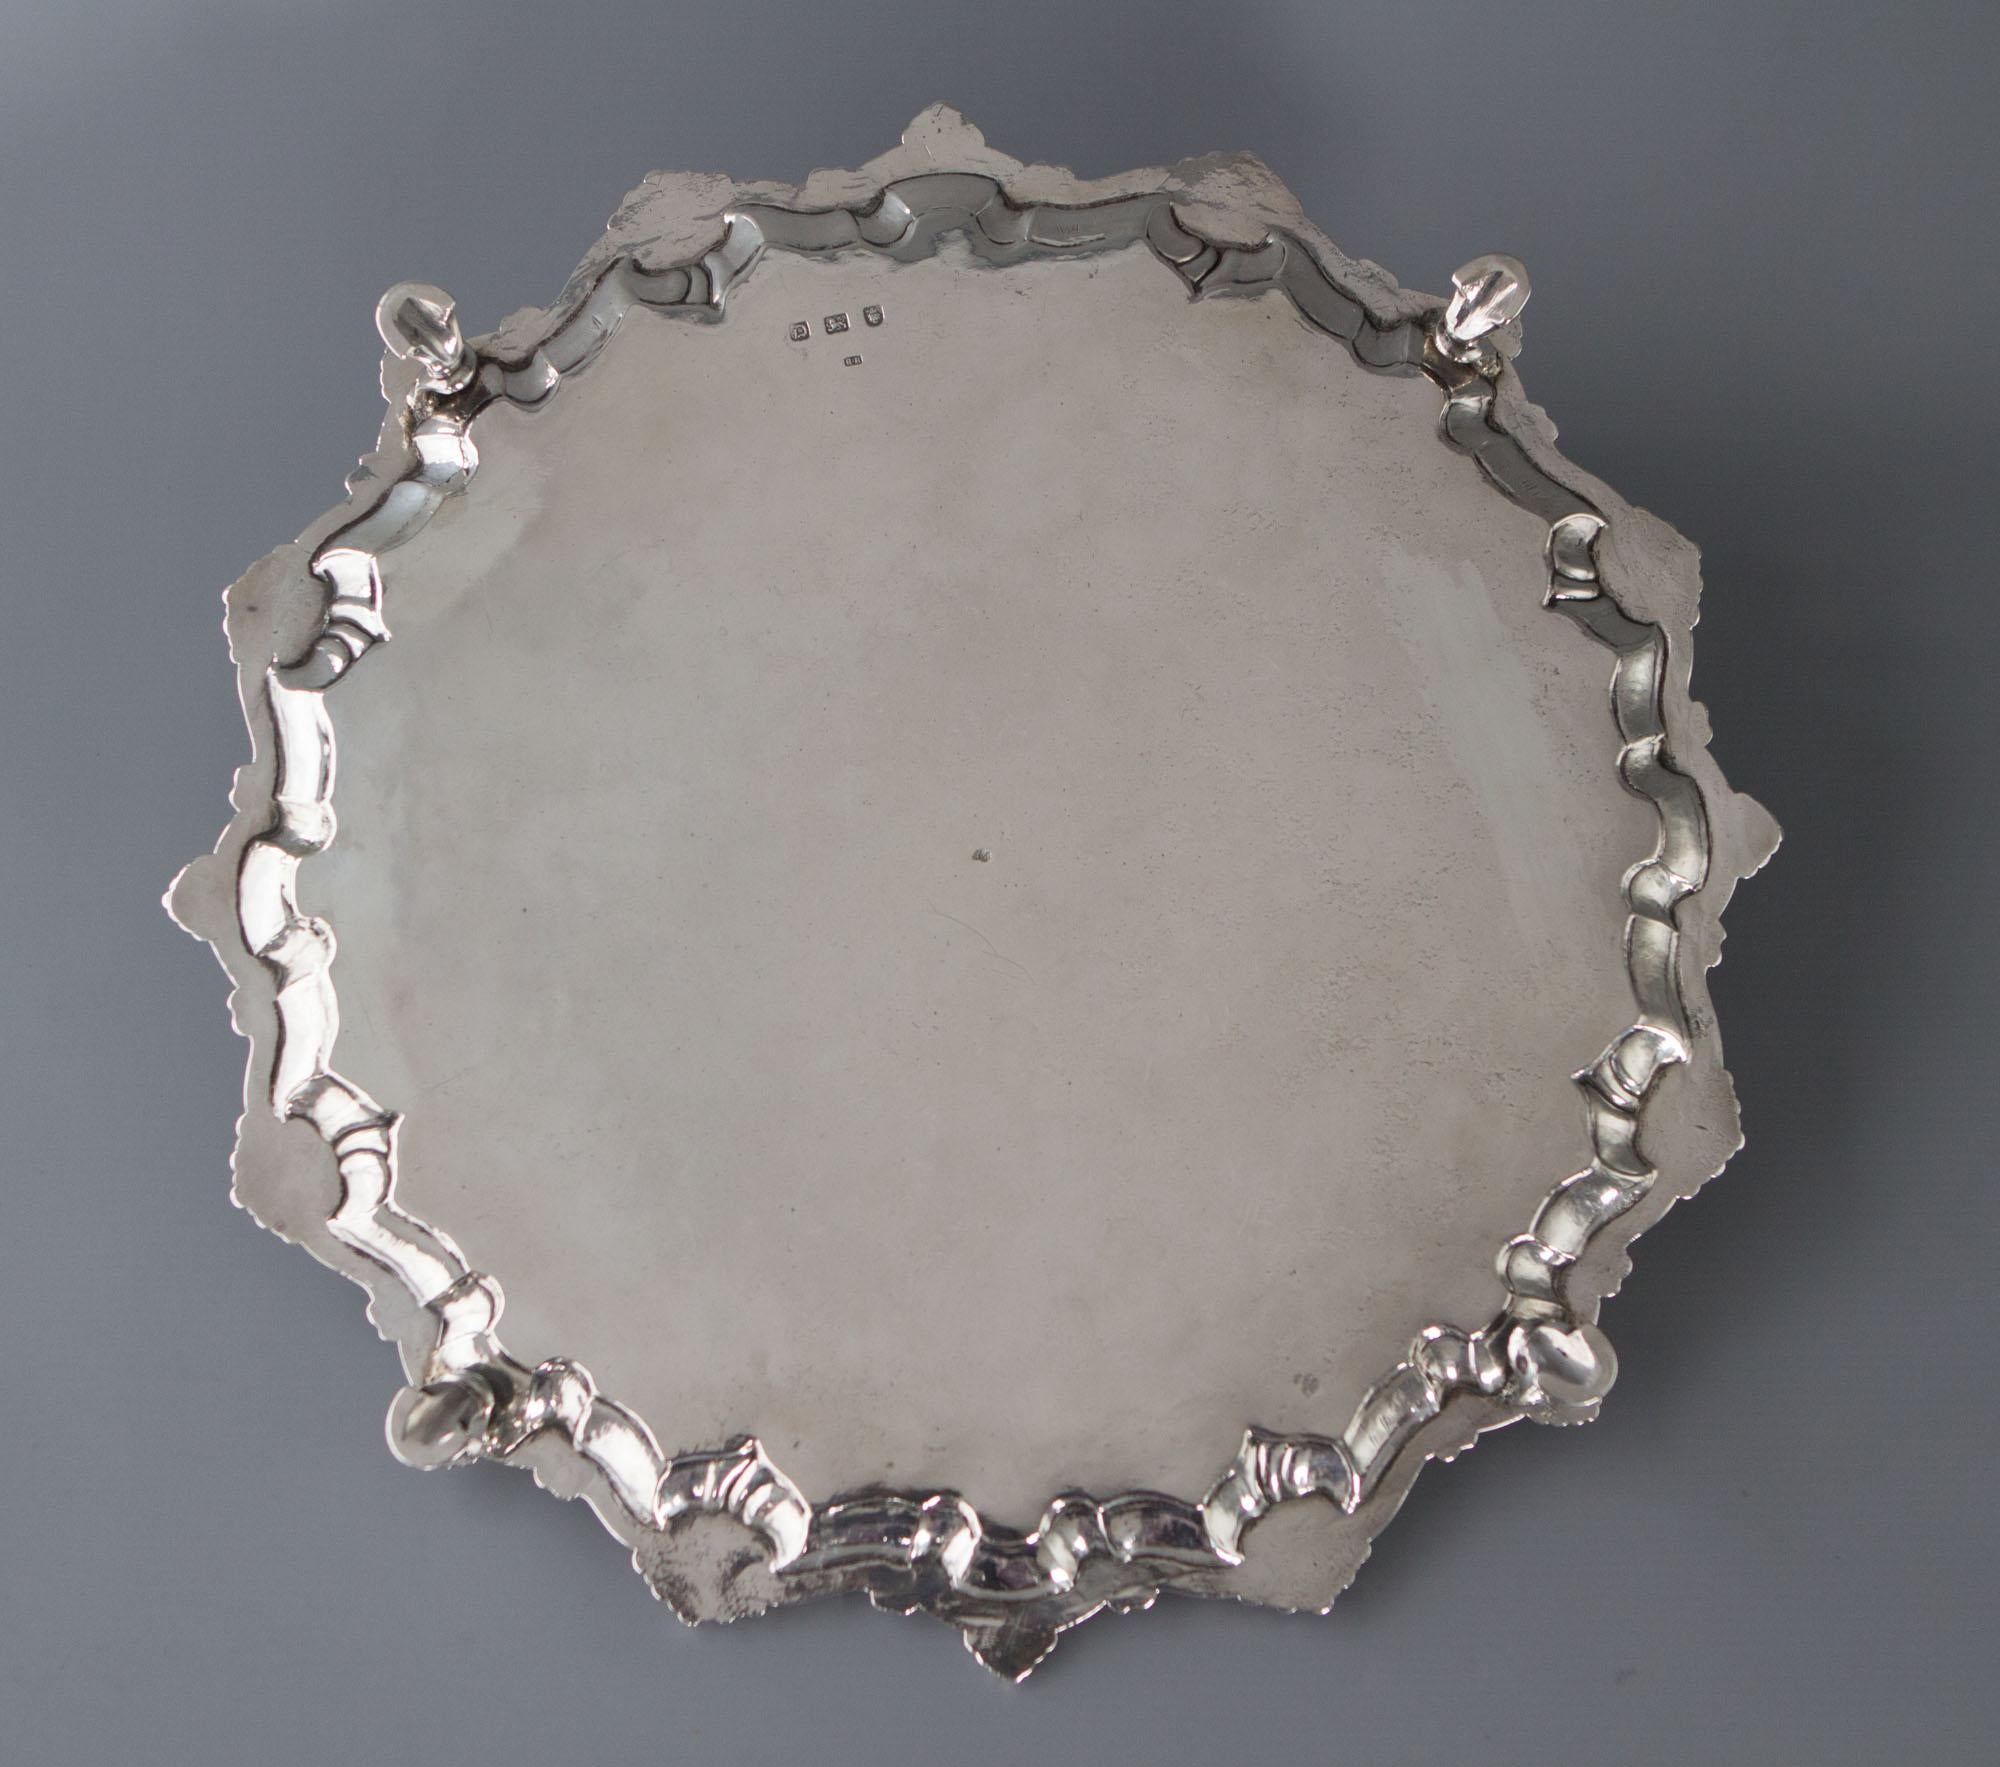 An excellent silver salver with scrolling shell pattern rim and the whole resting on four hoof feet. The center engraved with an armorial. (see pictures) The armorial is surrounded by a beautiful floral engraved design. 

Hallmarked for London